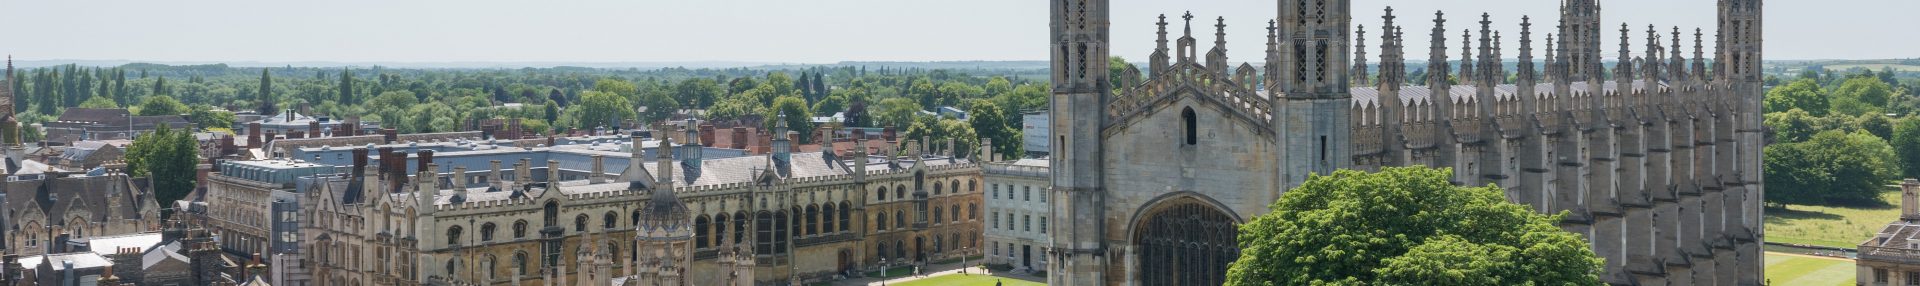 Aerial view of King's College and cityscape